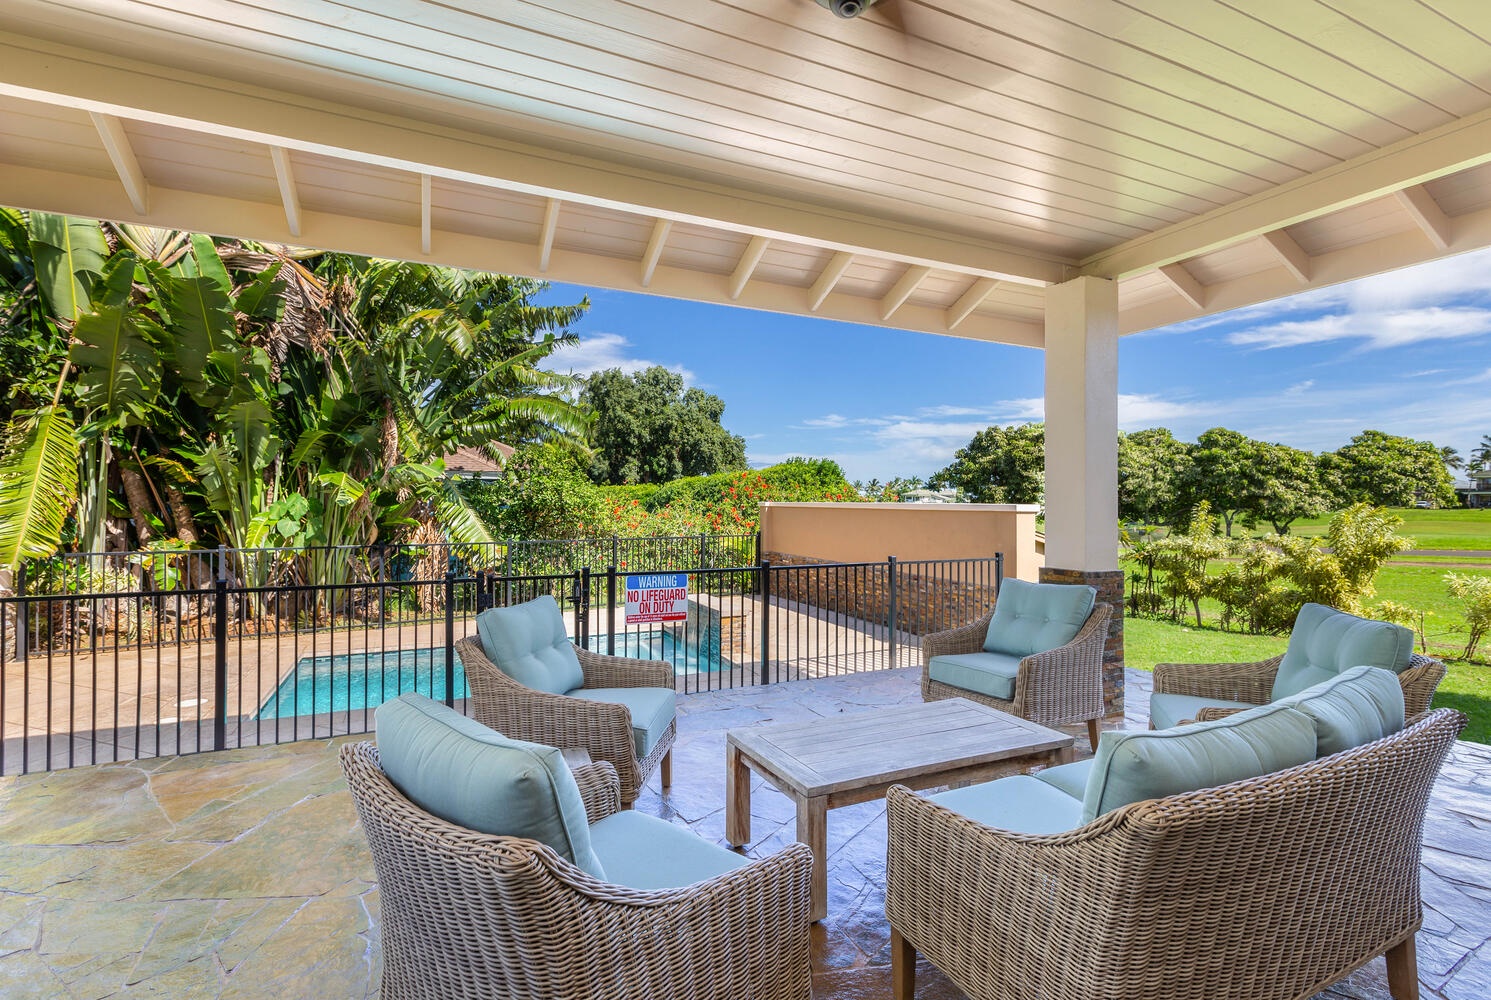 Princeville Vacation Rentals, Pohaku Villa - Gather with family and friends on your private terrace